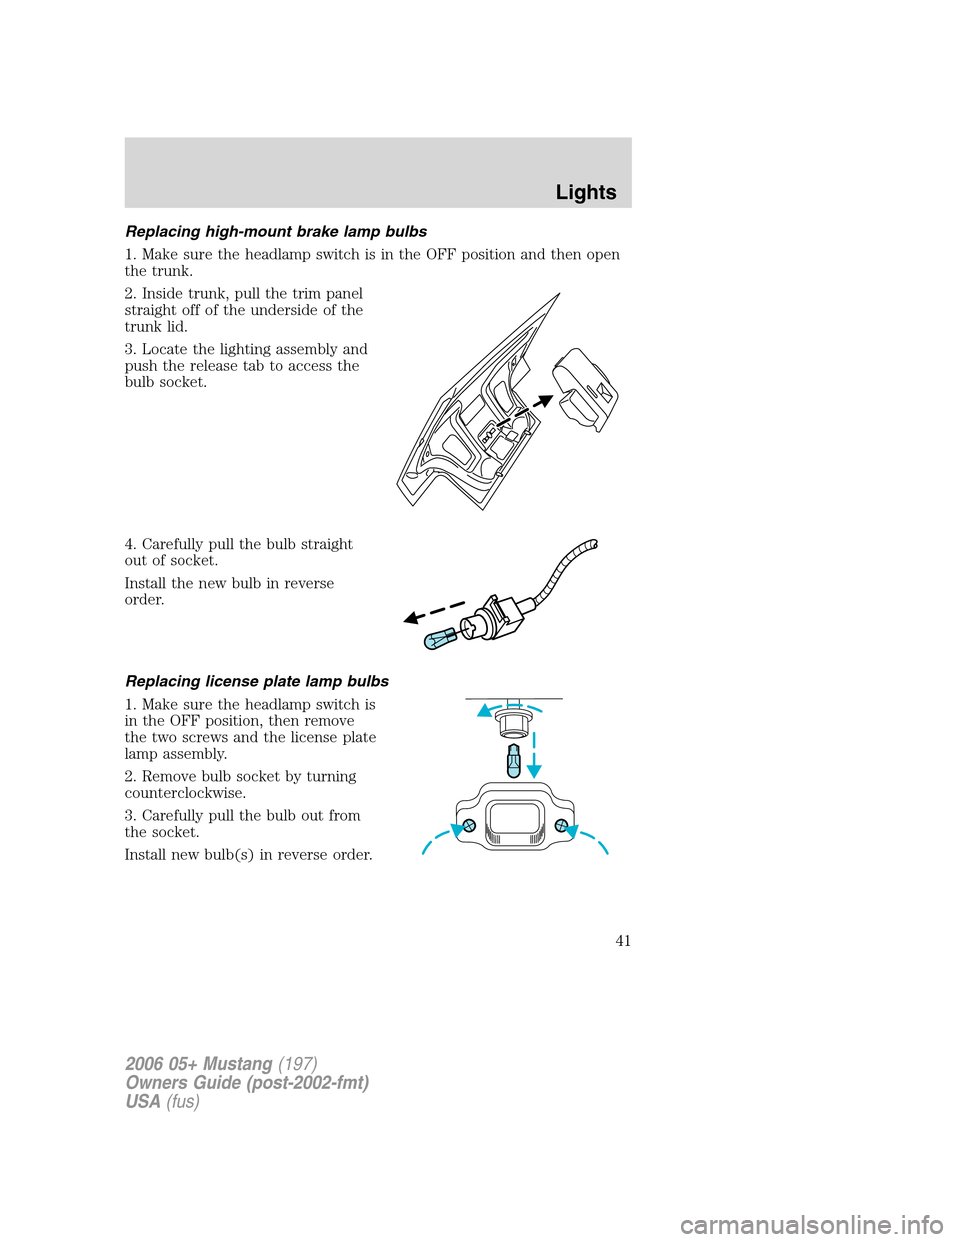 FORD MUSTANG 2006 5.G User Guide Replacing high-mount brake lamp bulbs
1. Make sure the headlamp switch is in the OFF position and then open
the trunk.
2. Inside trunk, pull the trim panel
straight off of the underside of the
trunk l